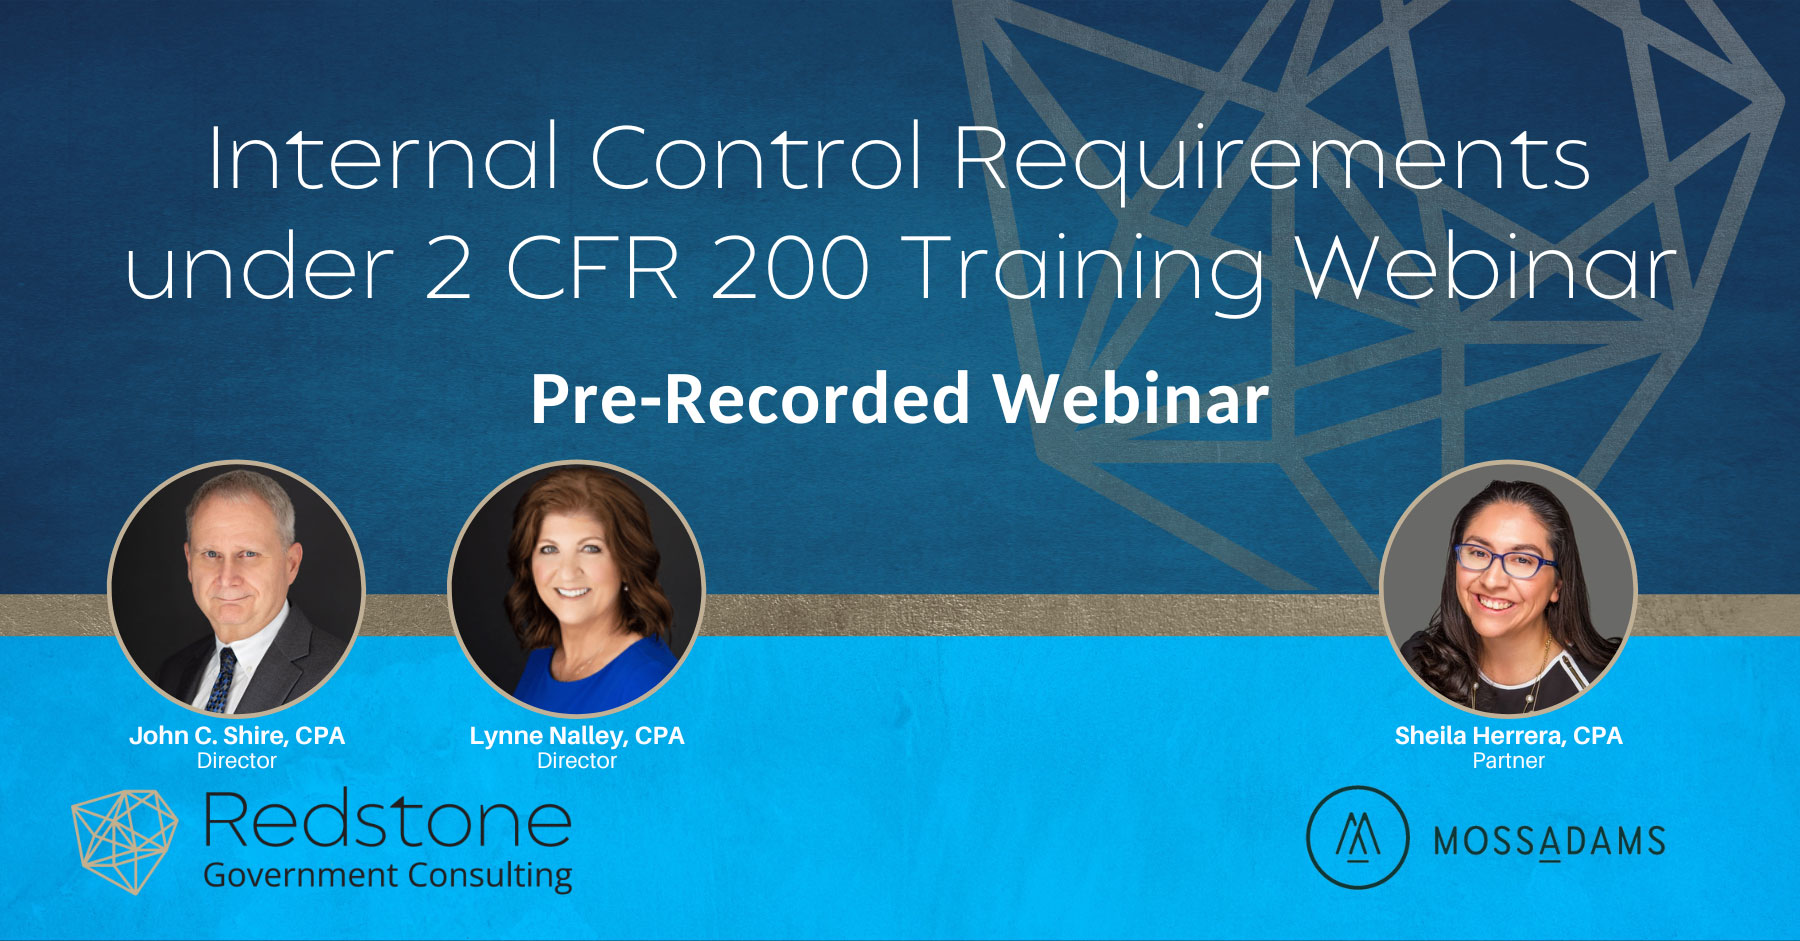 RGCI Internal Control Requirements under 2 CFR 200 Training Webinar Featured Page